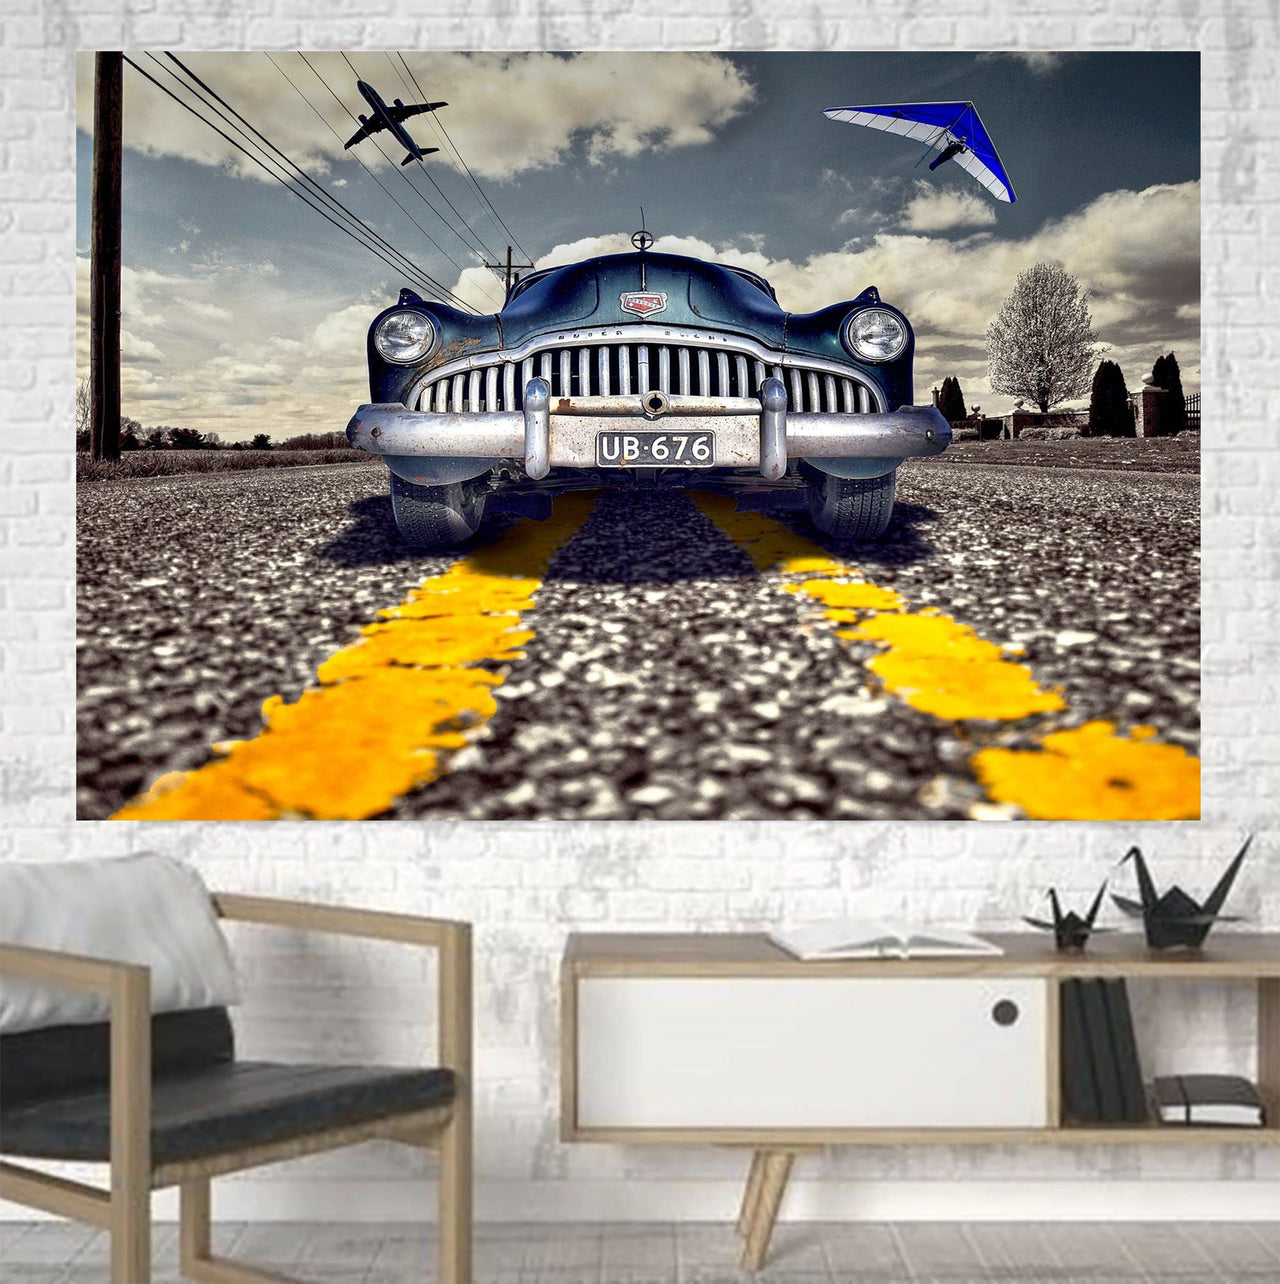 Old Car and Planes Printed Canvas Posters (1 Piece) Aviation Shop 